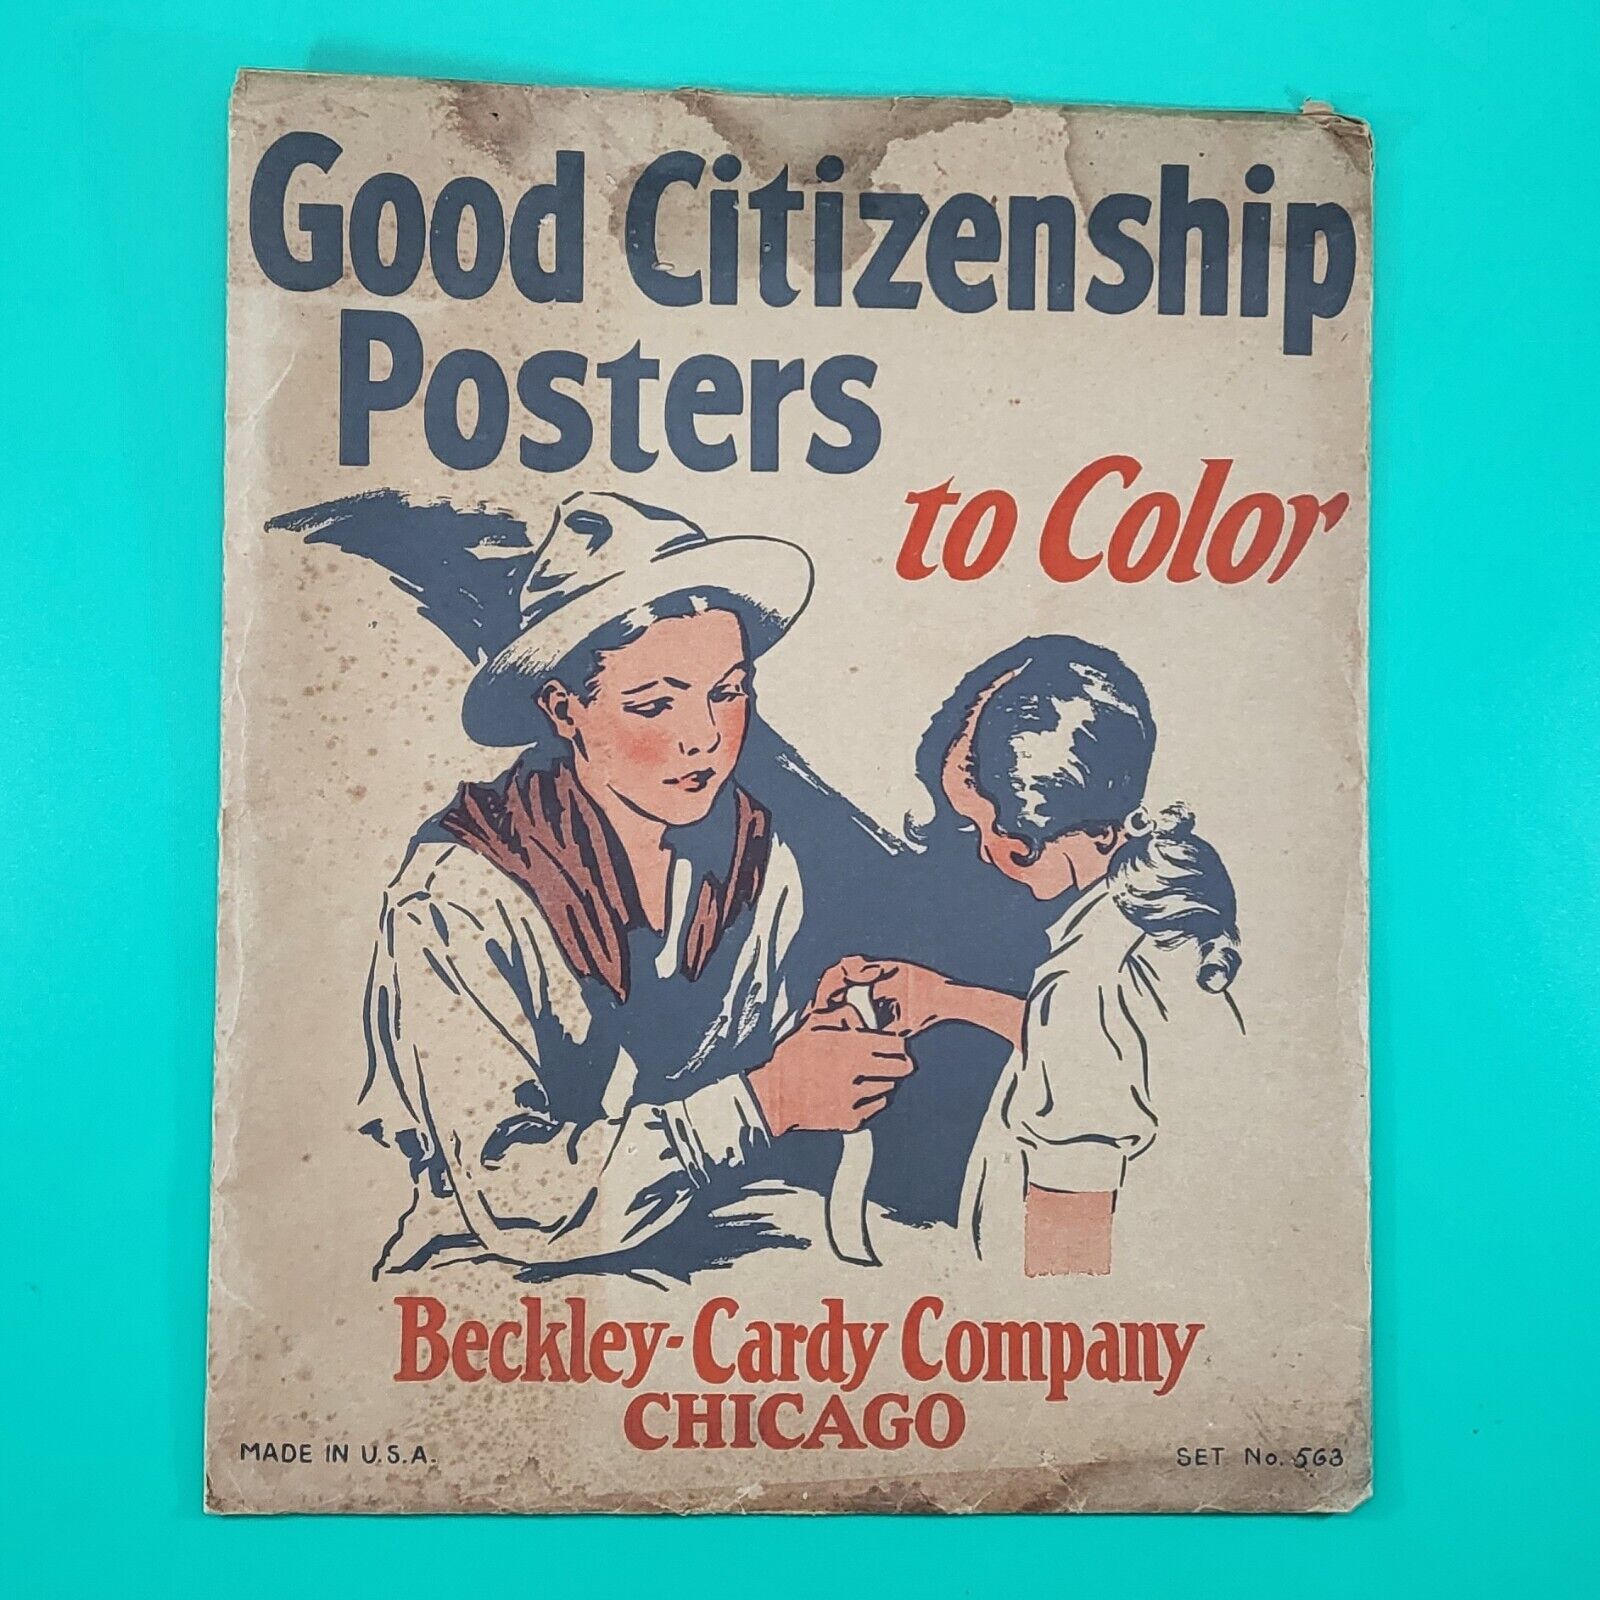 Vintage Papers Good Citizenship Posters To Color Beckley-Cardy Company 1929